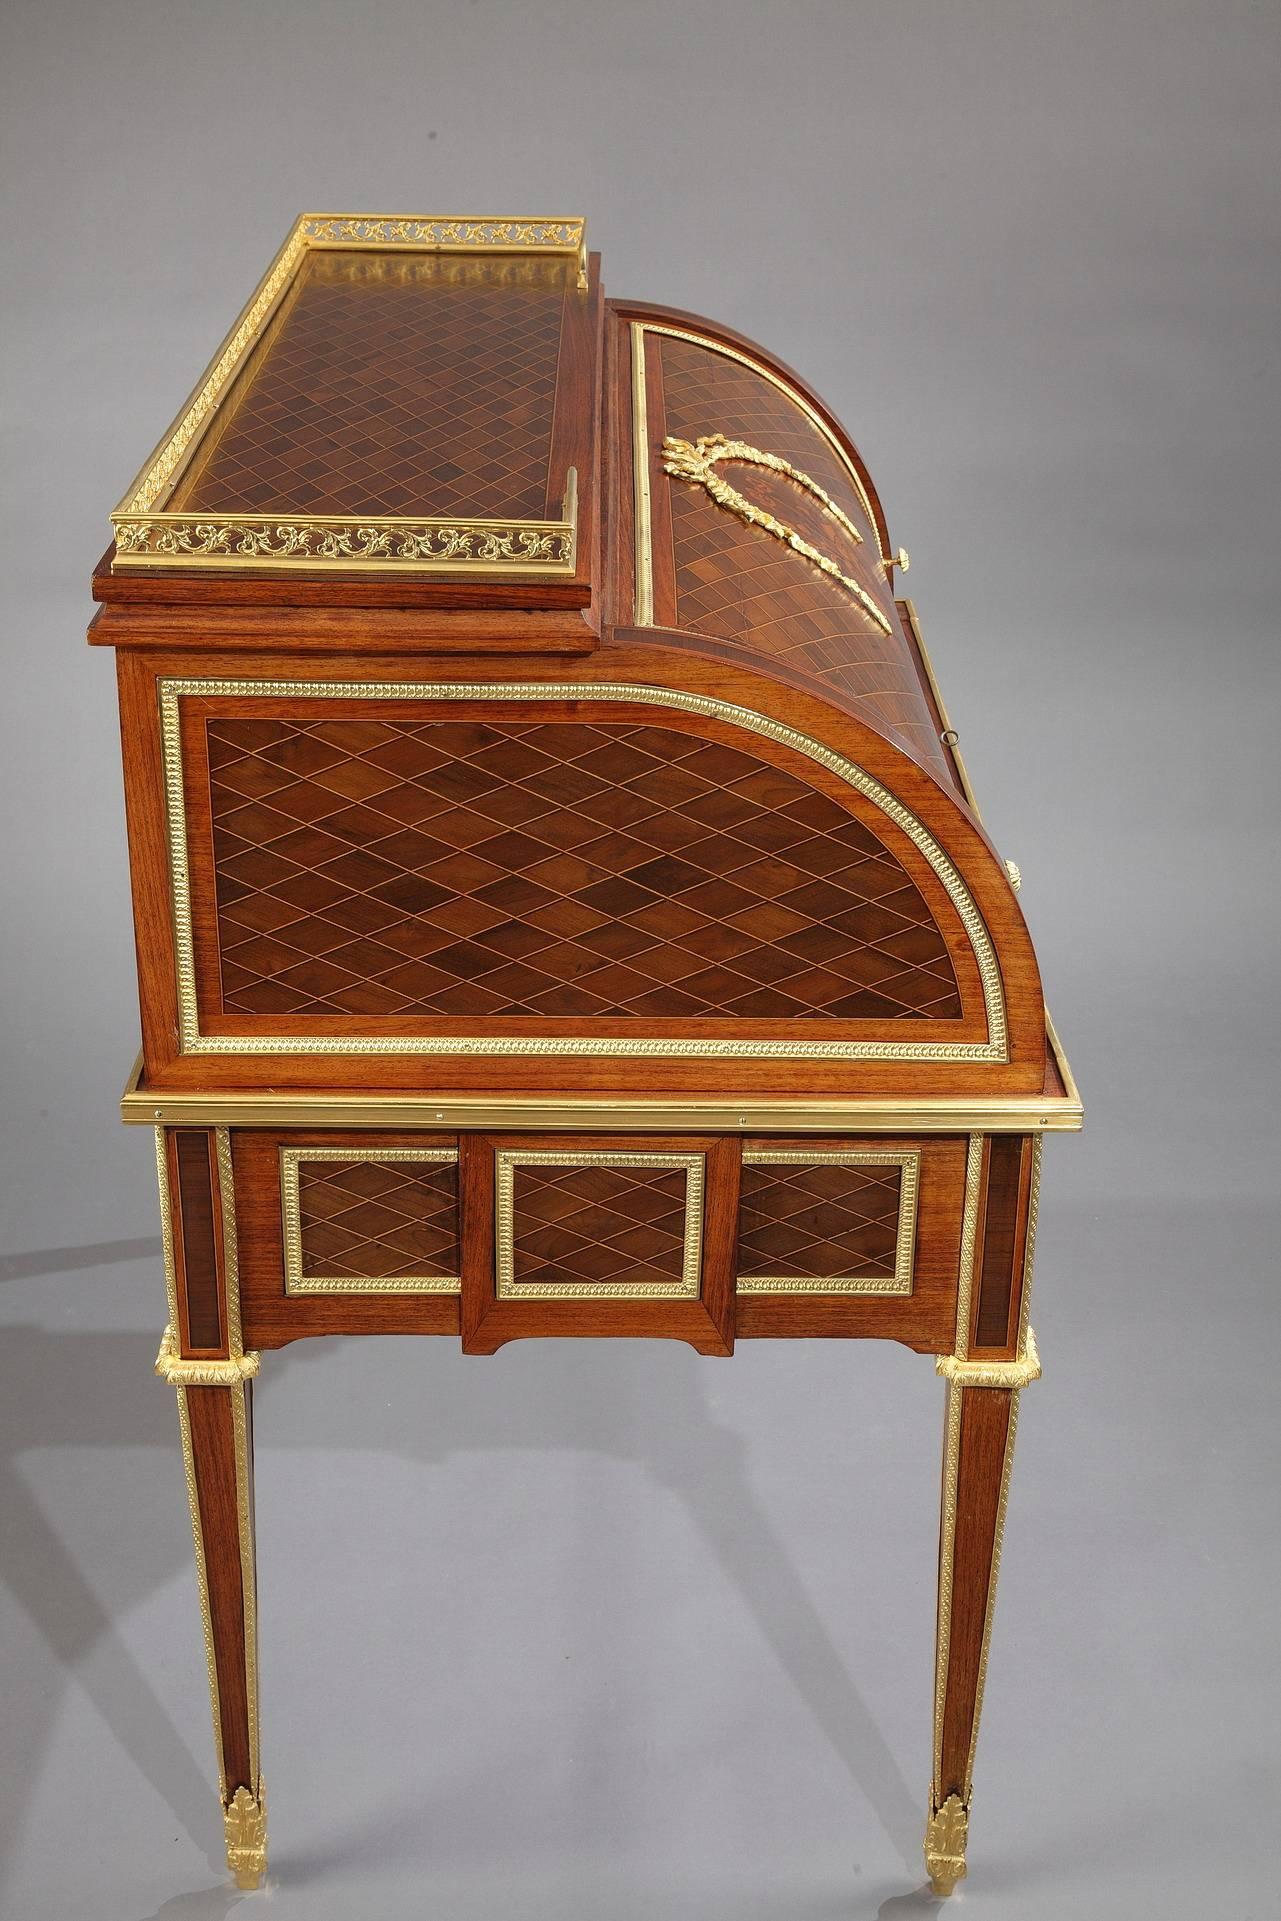 19th Century Marquetry Rolltop Desk after One Commissioned by Marie-Antoinette to Riesener